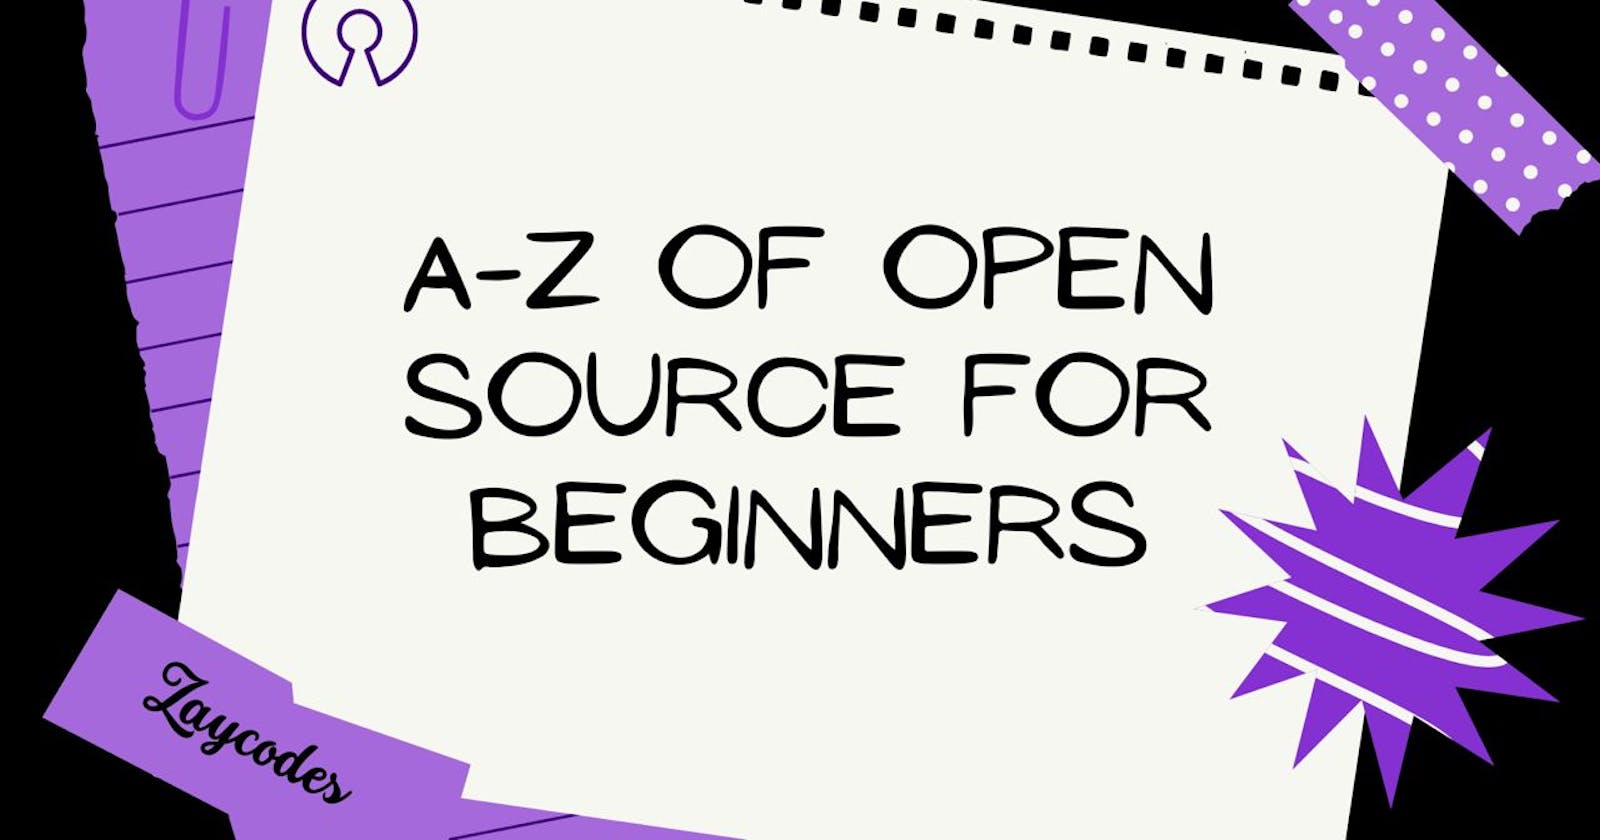 A-Z of Open Source for Beginners